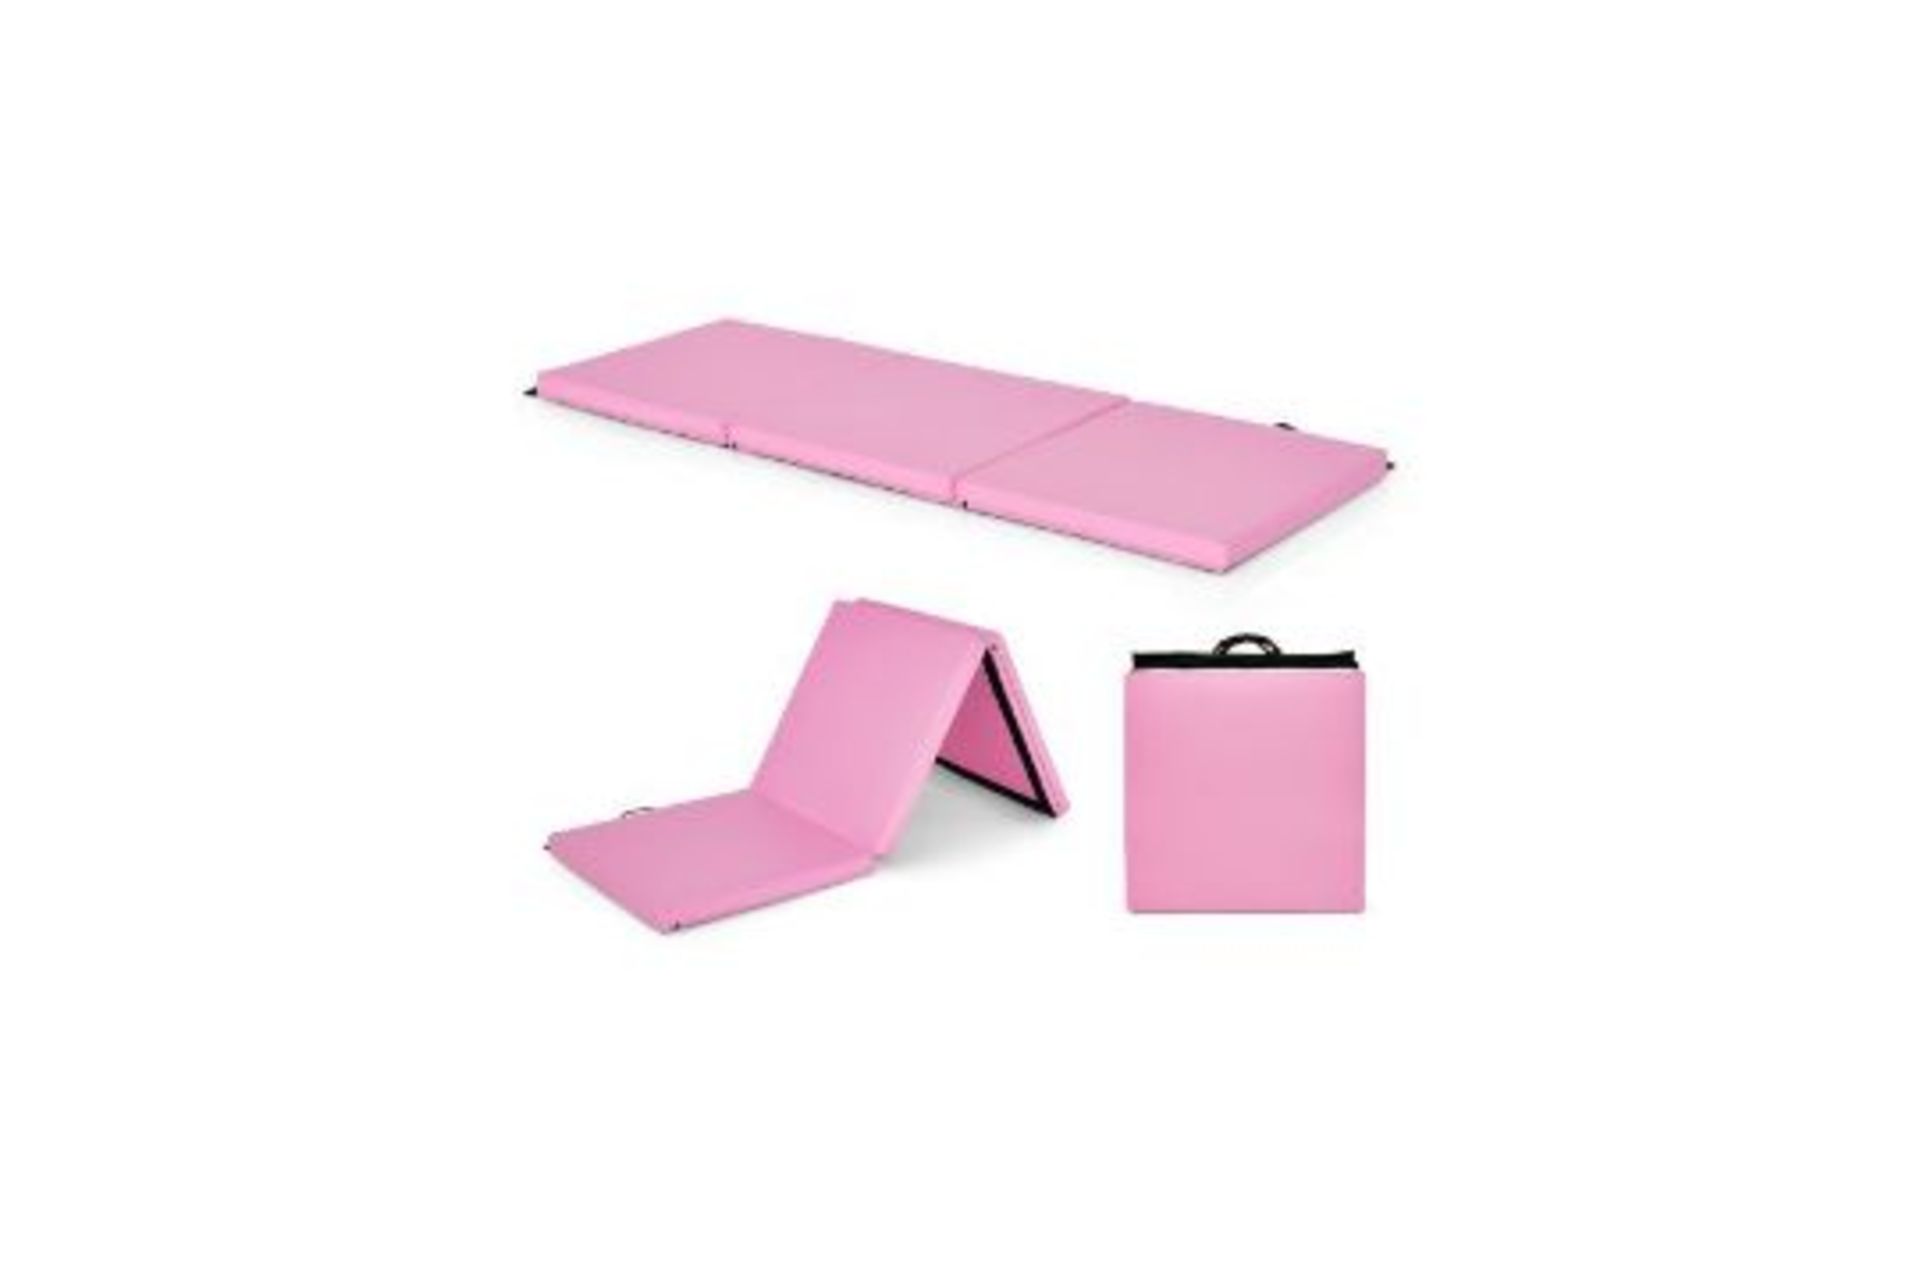 Tri-Fold Folding Exercise Mat with PU Leather Cover. - R14.4. The high-density EPE foam padding